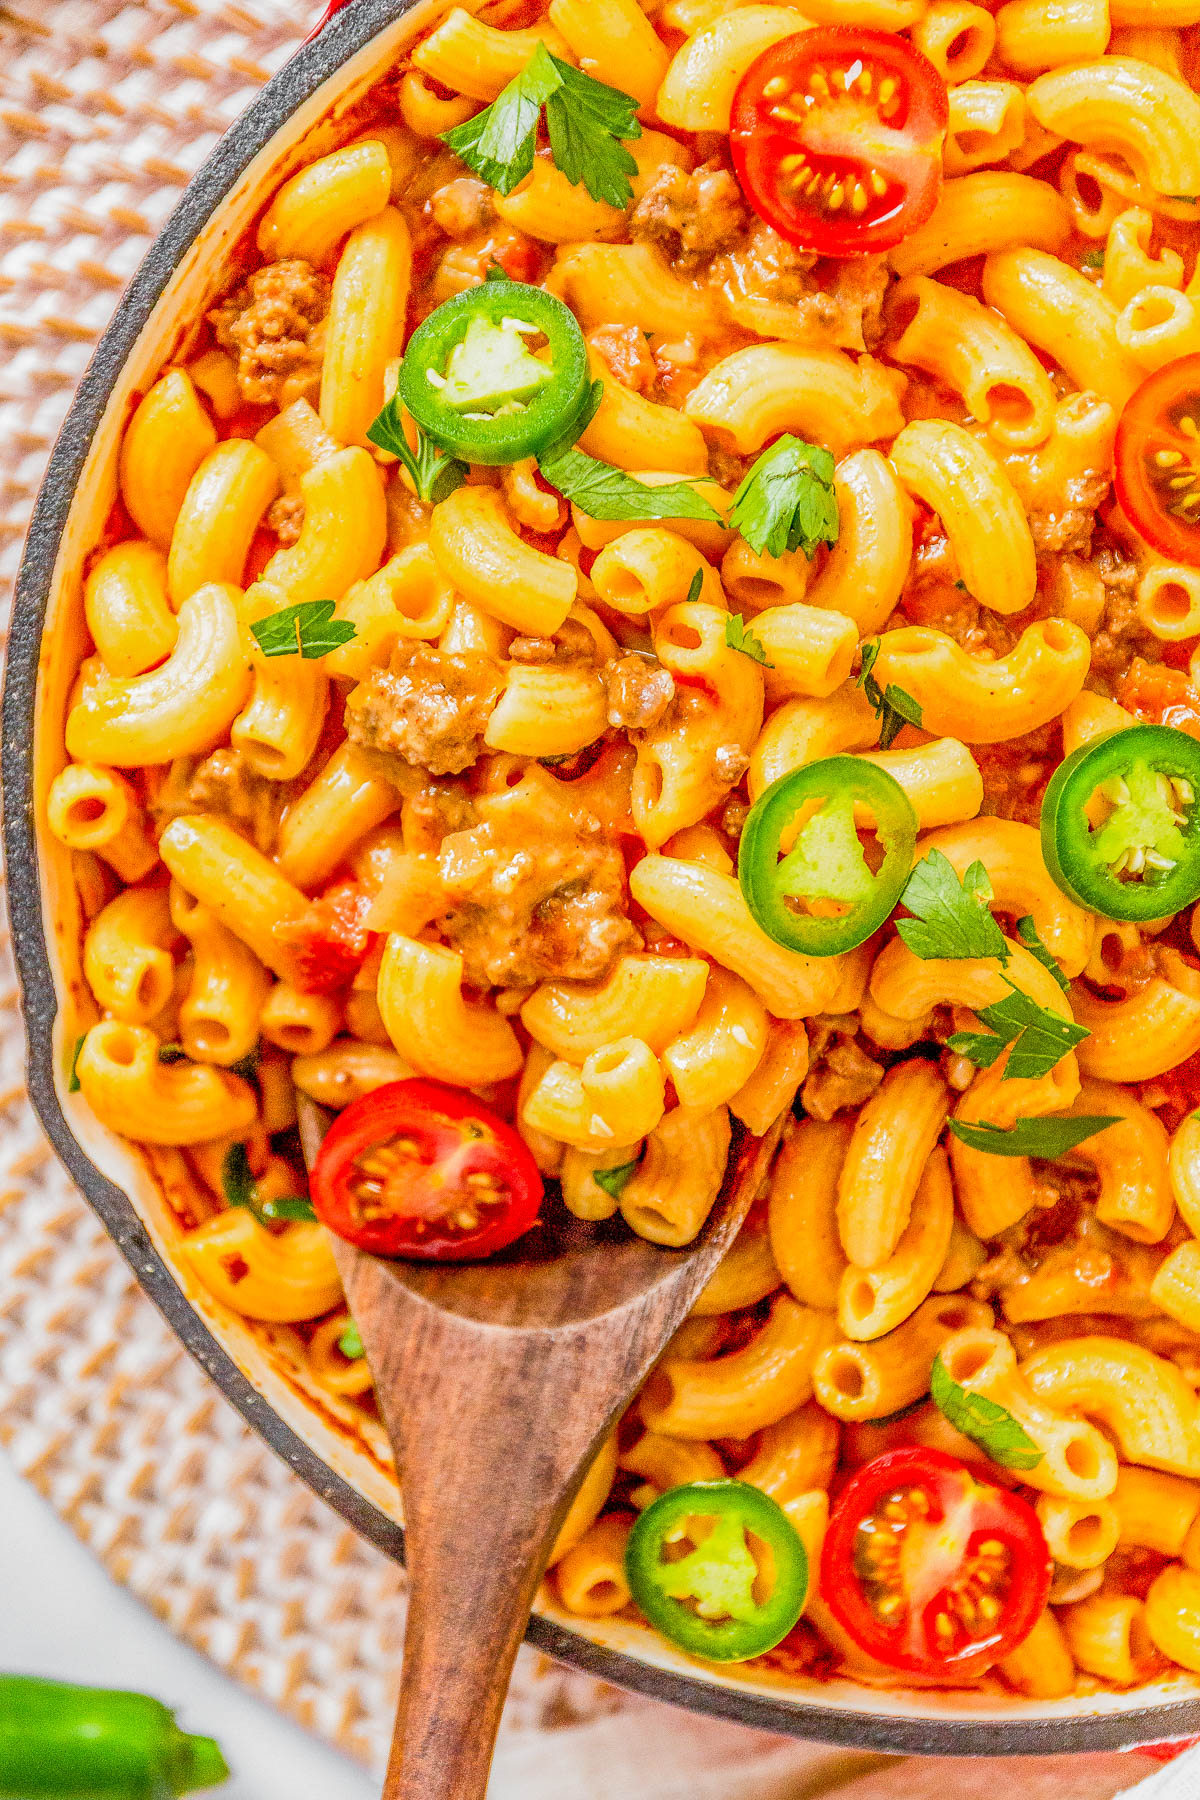 A skillet of cheesy macaroni with ground beef, garnished with sliced tomatoes, jalapeños, and fresh herbs.